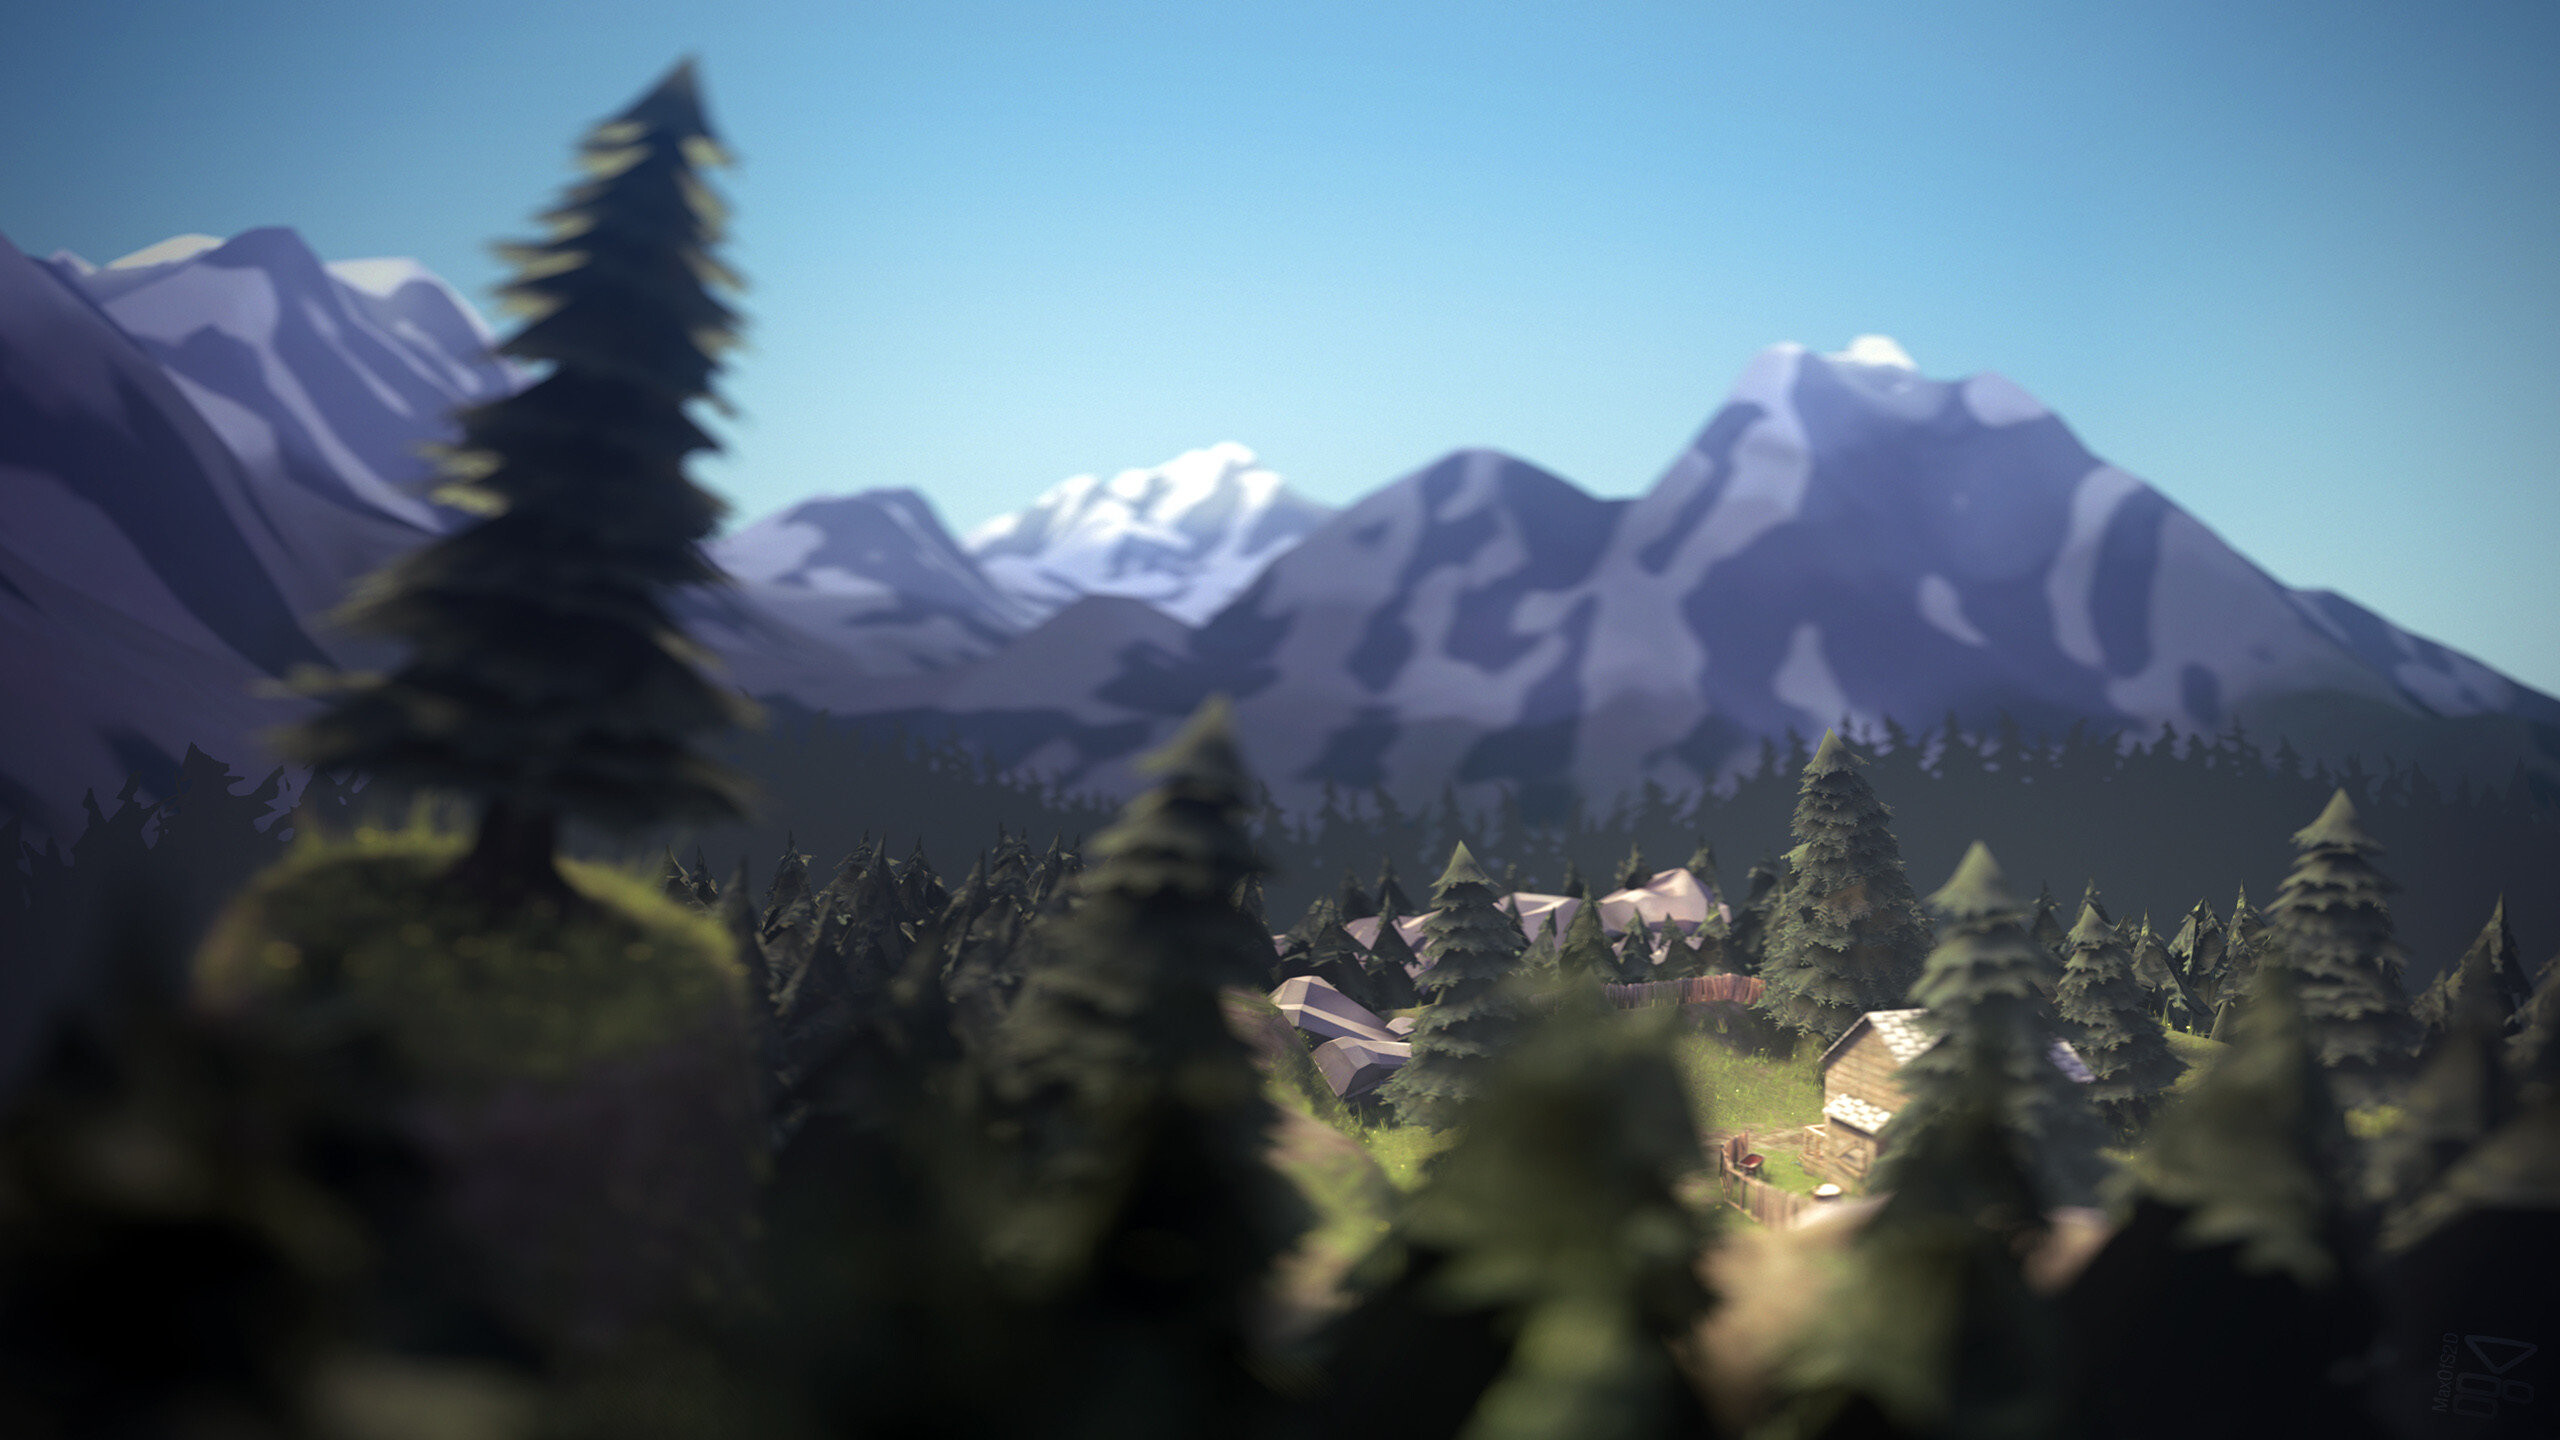 Garry's Mod: The Outlands, An alpine region located north of the City 17 outskirts, The White Forest remodeled. 2560x1440 HD Background.